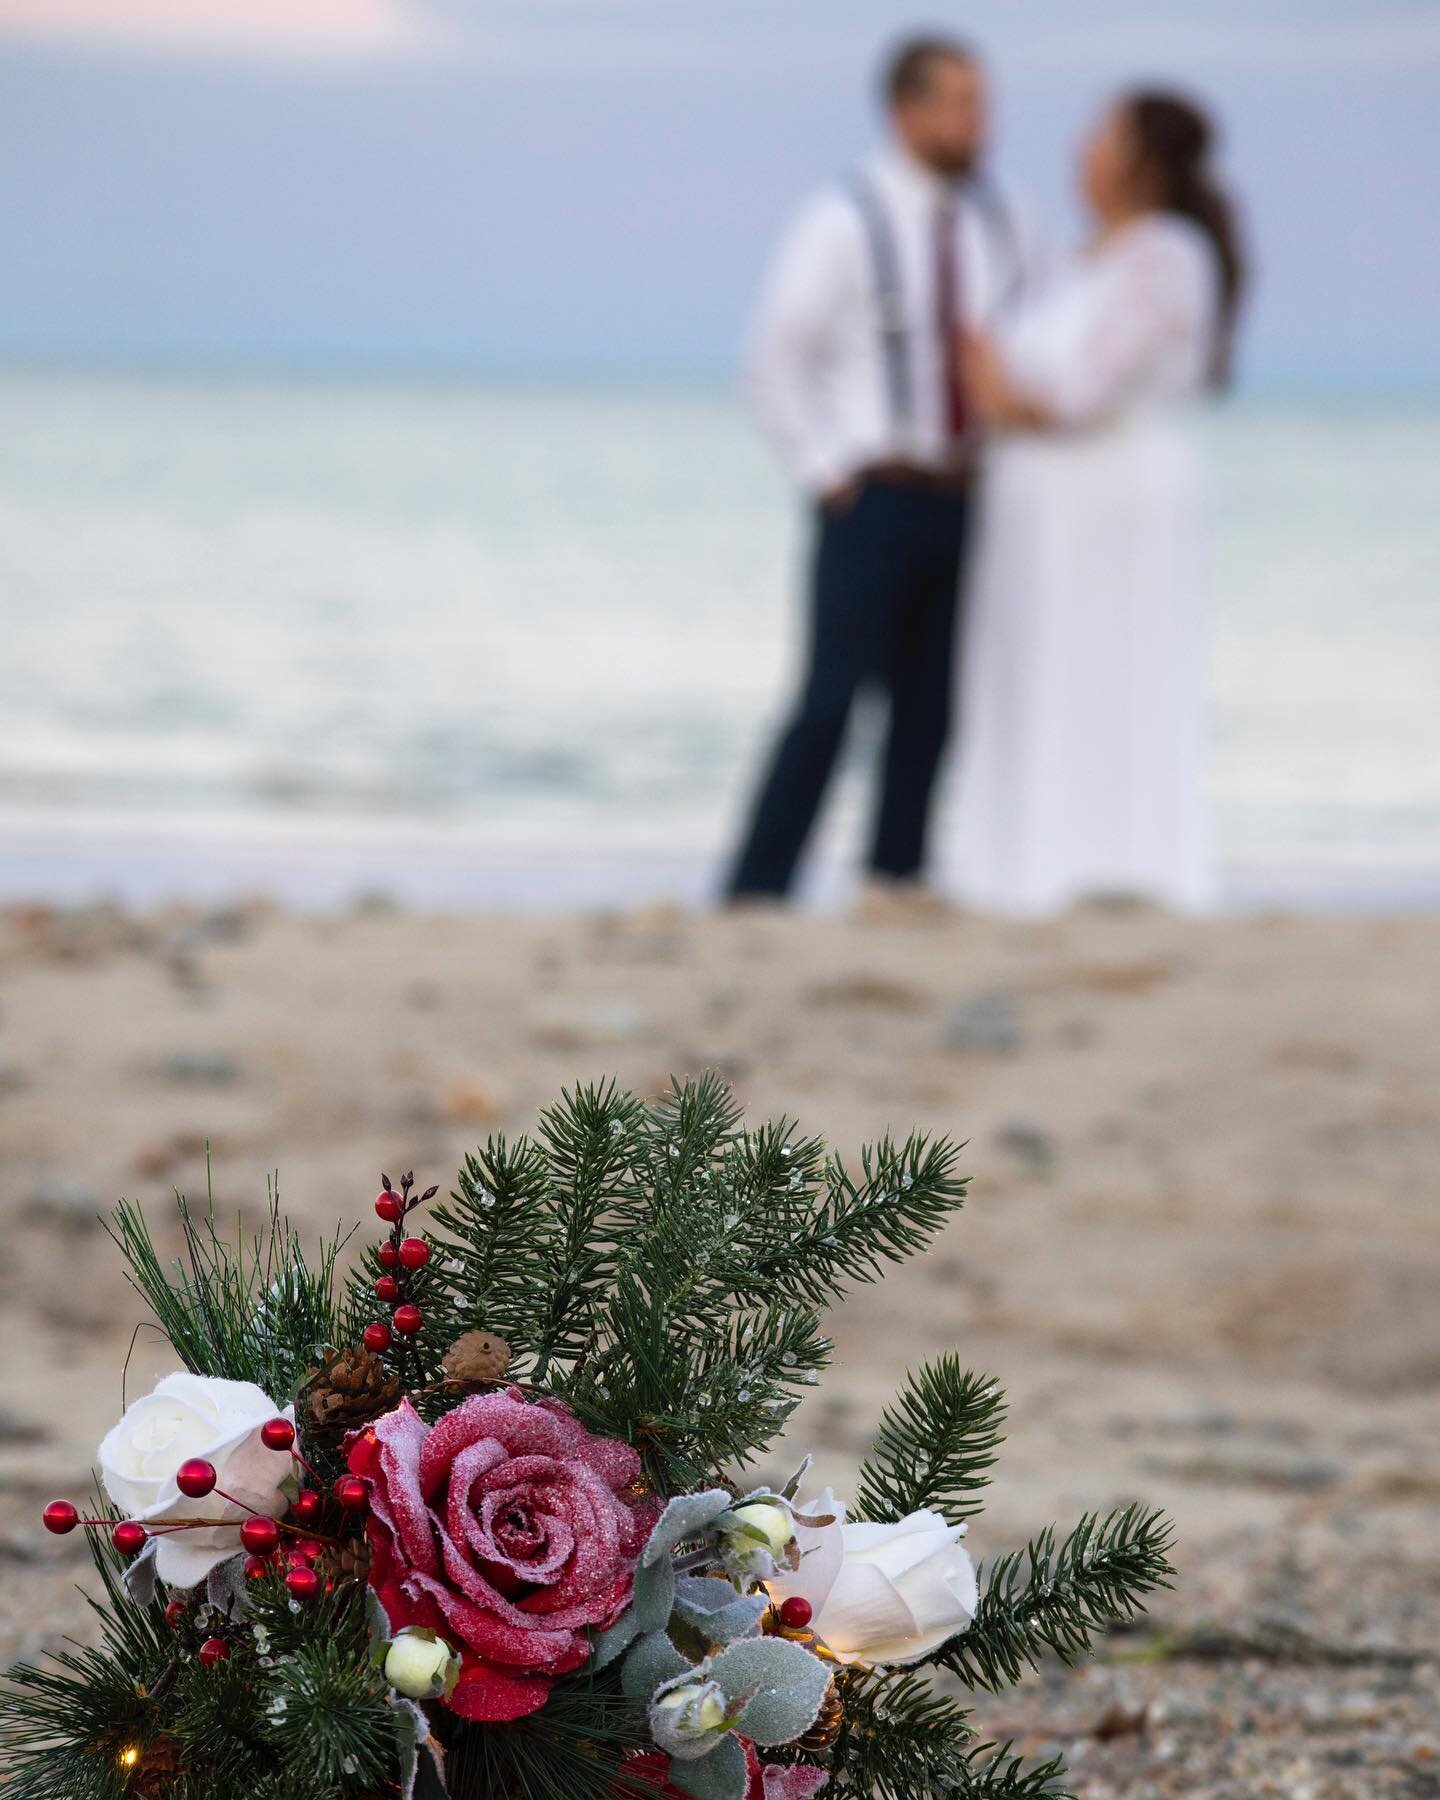 I am honored my best friend trusted me with her wedding photos! Wedding photography presented a whole new challenge, thankfully the weather was great and the beach was the perfect background 💐🏖
.
.
.
.
#photographer #brides #bridal #florist #floral